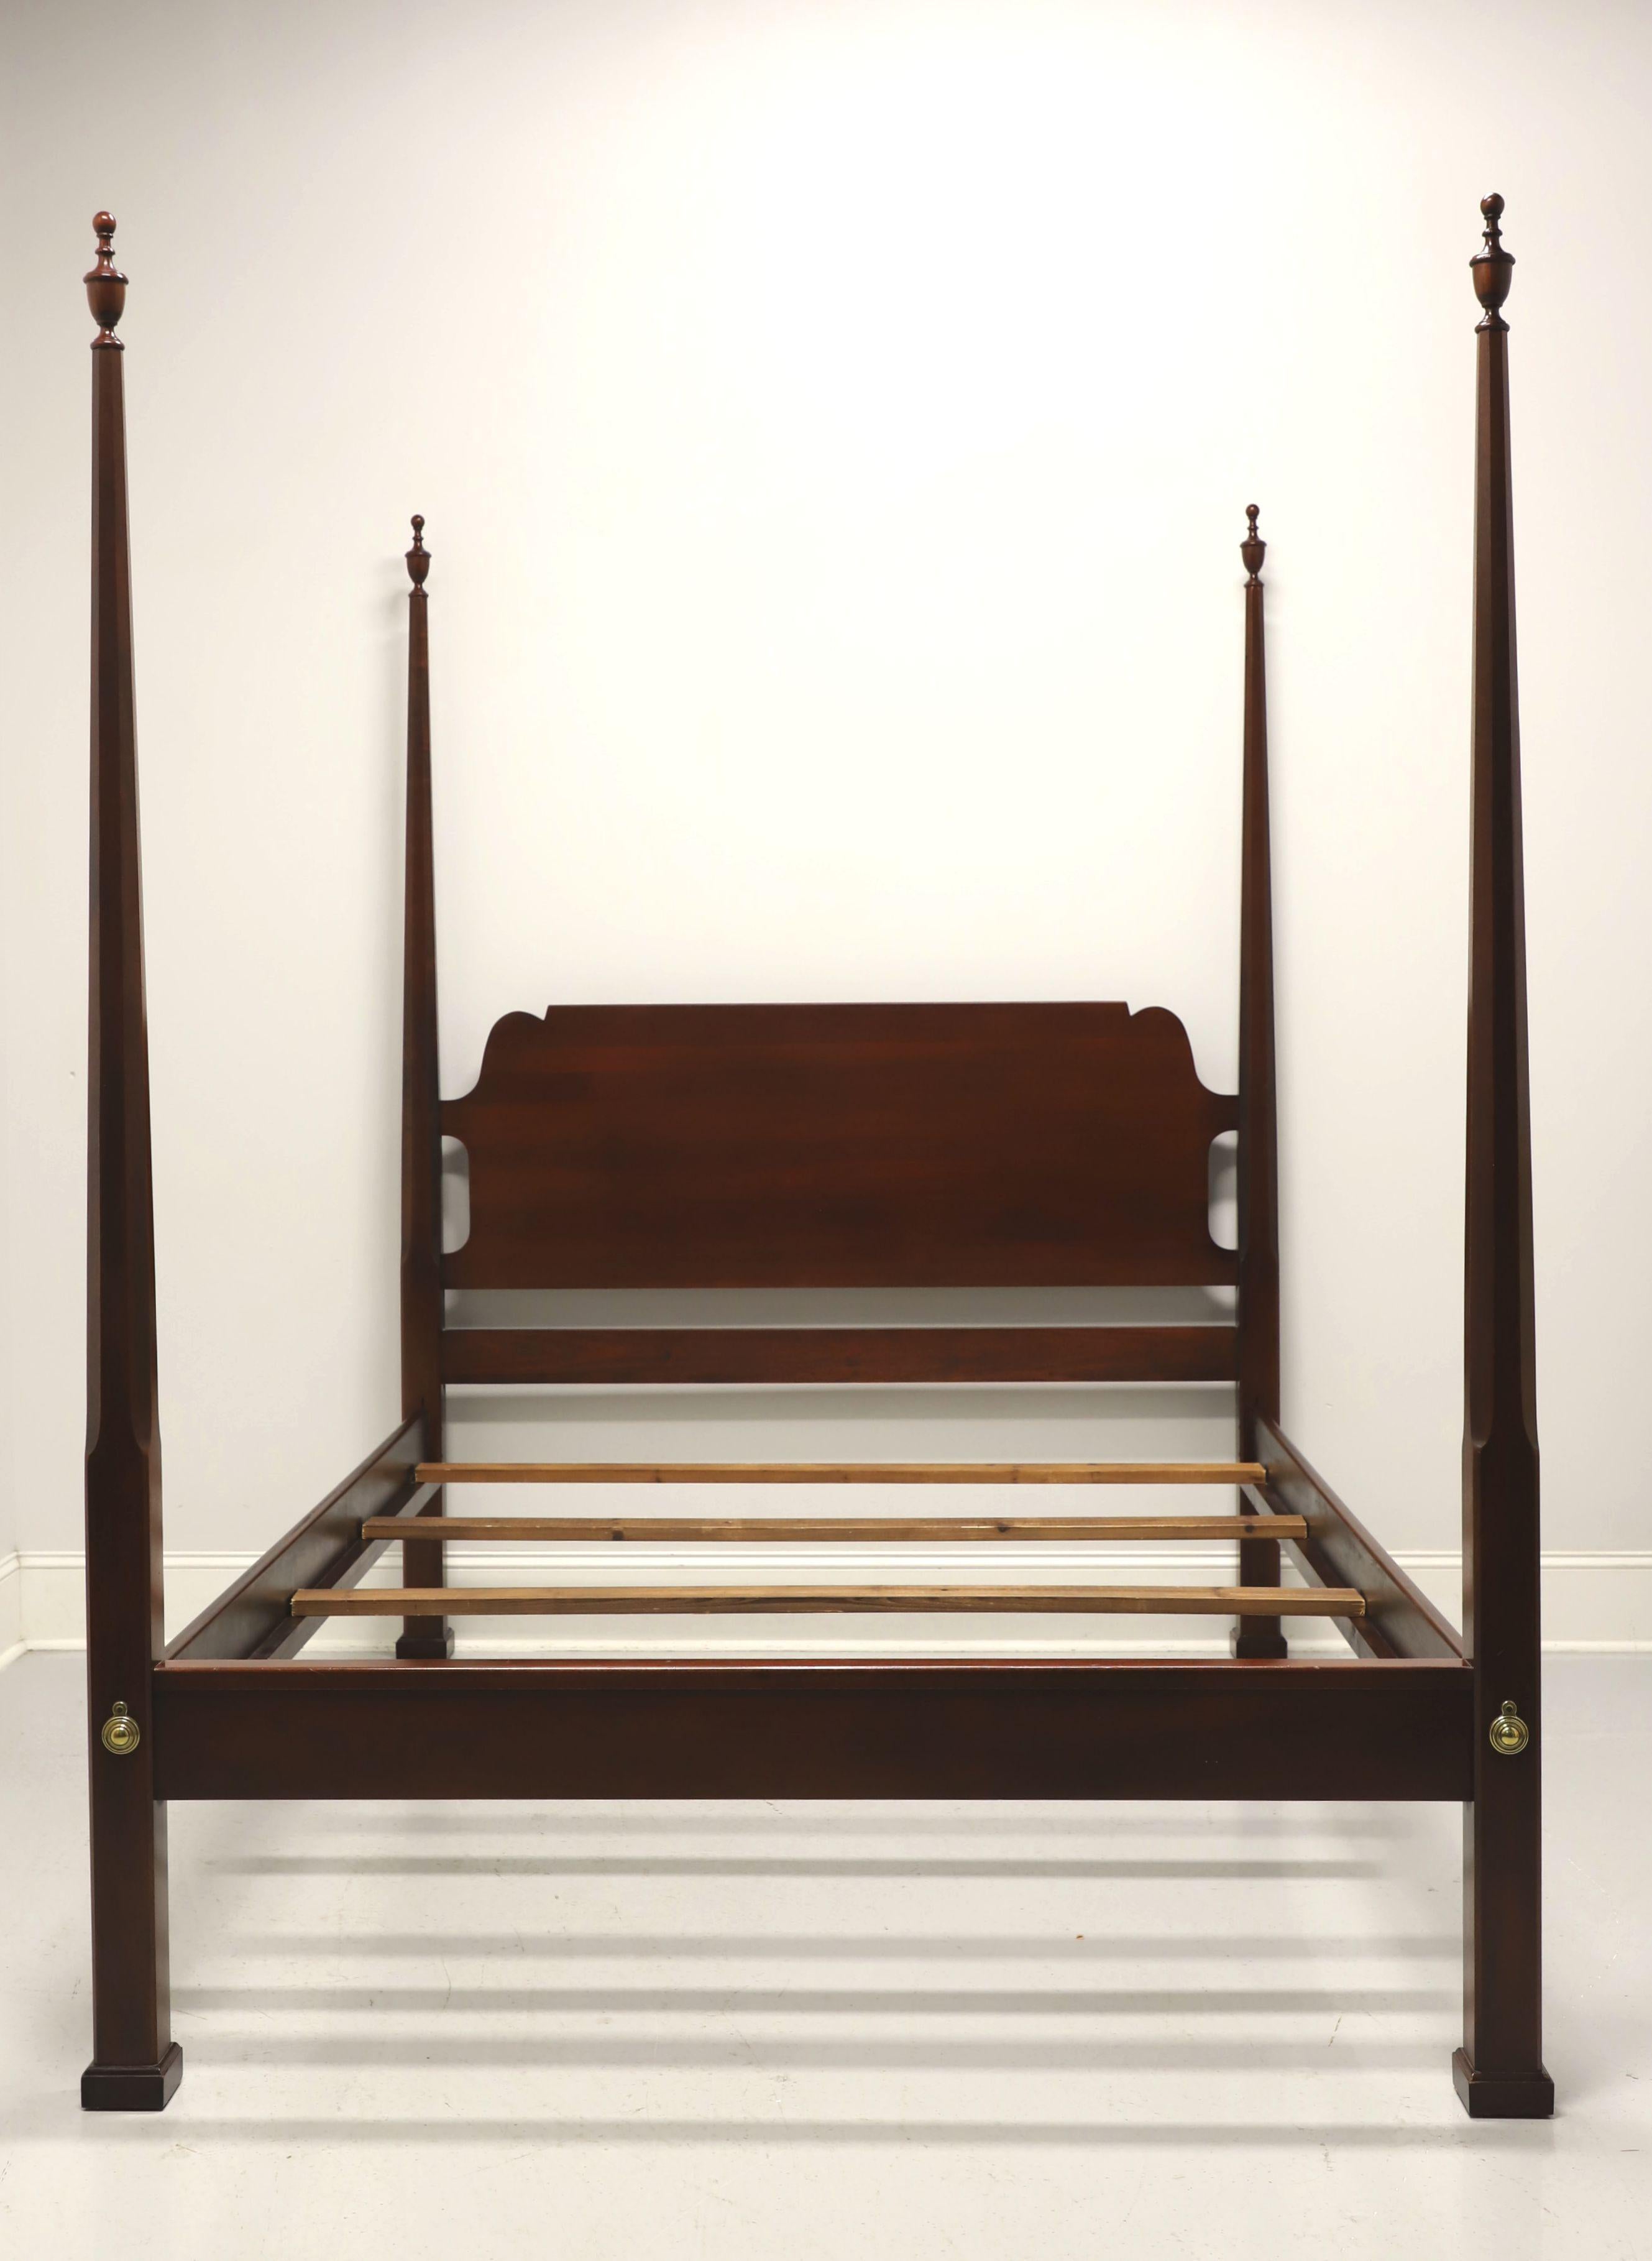 A Traditional style queen size pencil post bed by Link-Taylor. Solid heirloom mahogany with four pencil shaped posts with finials, brass covers to footboard, clip held side rails with wood bracers and four wood slats for mattress support. Made in